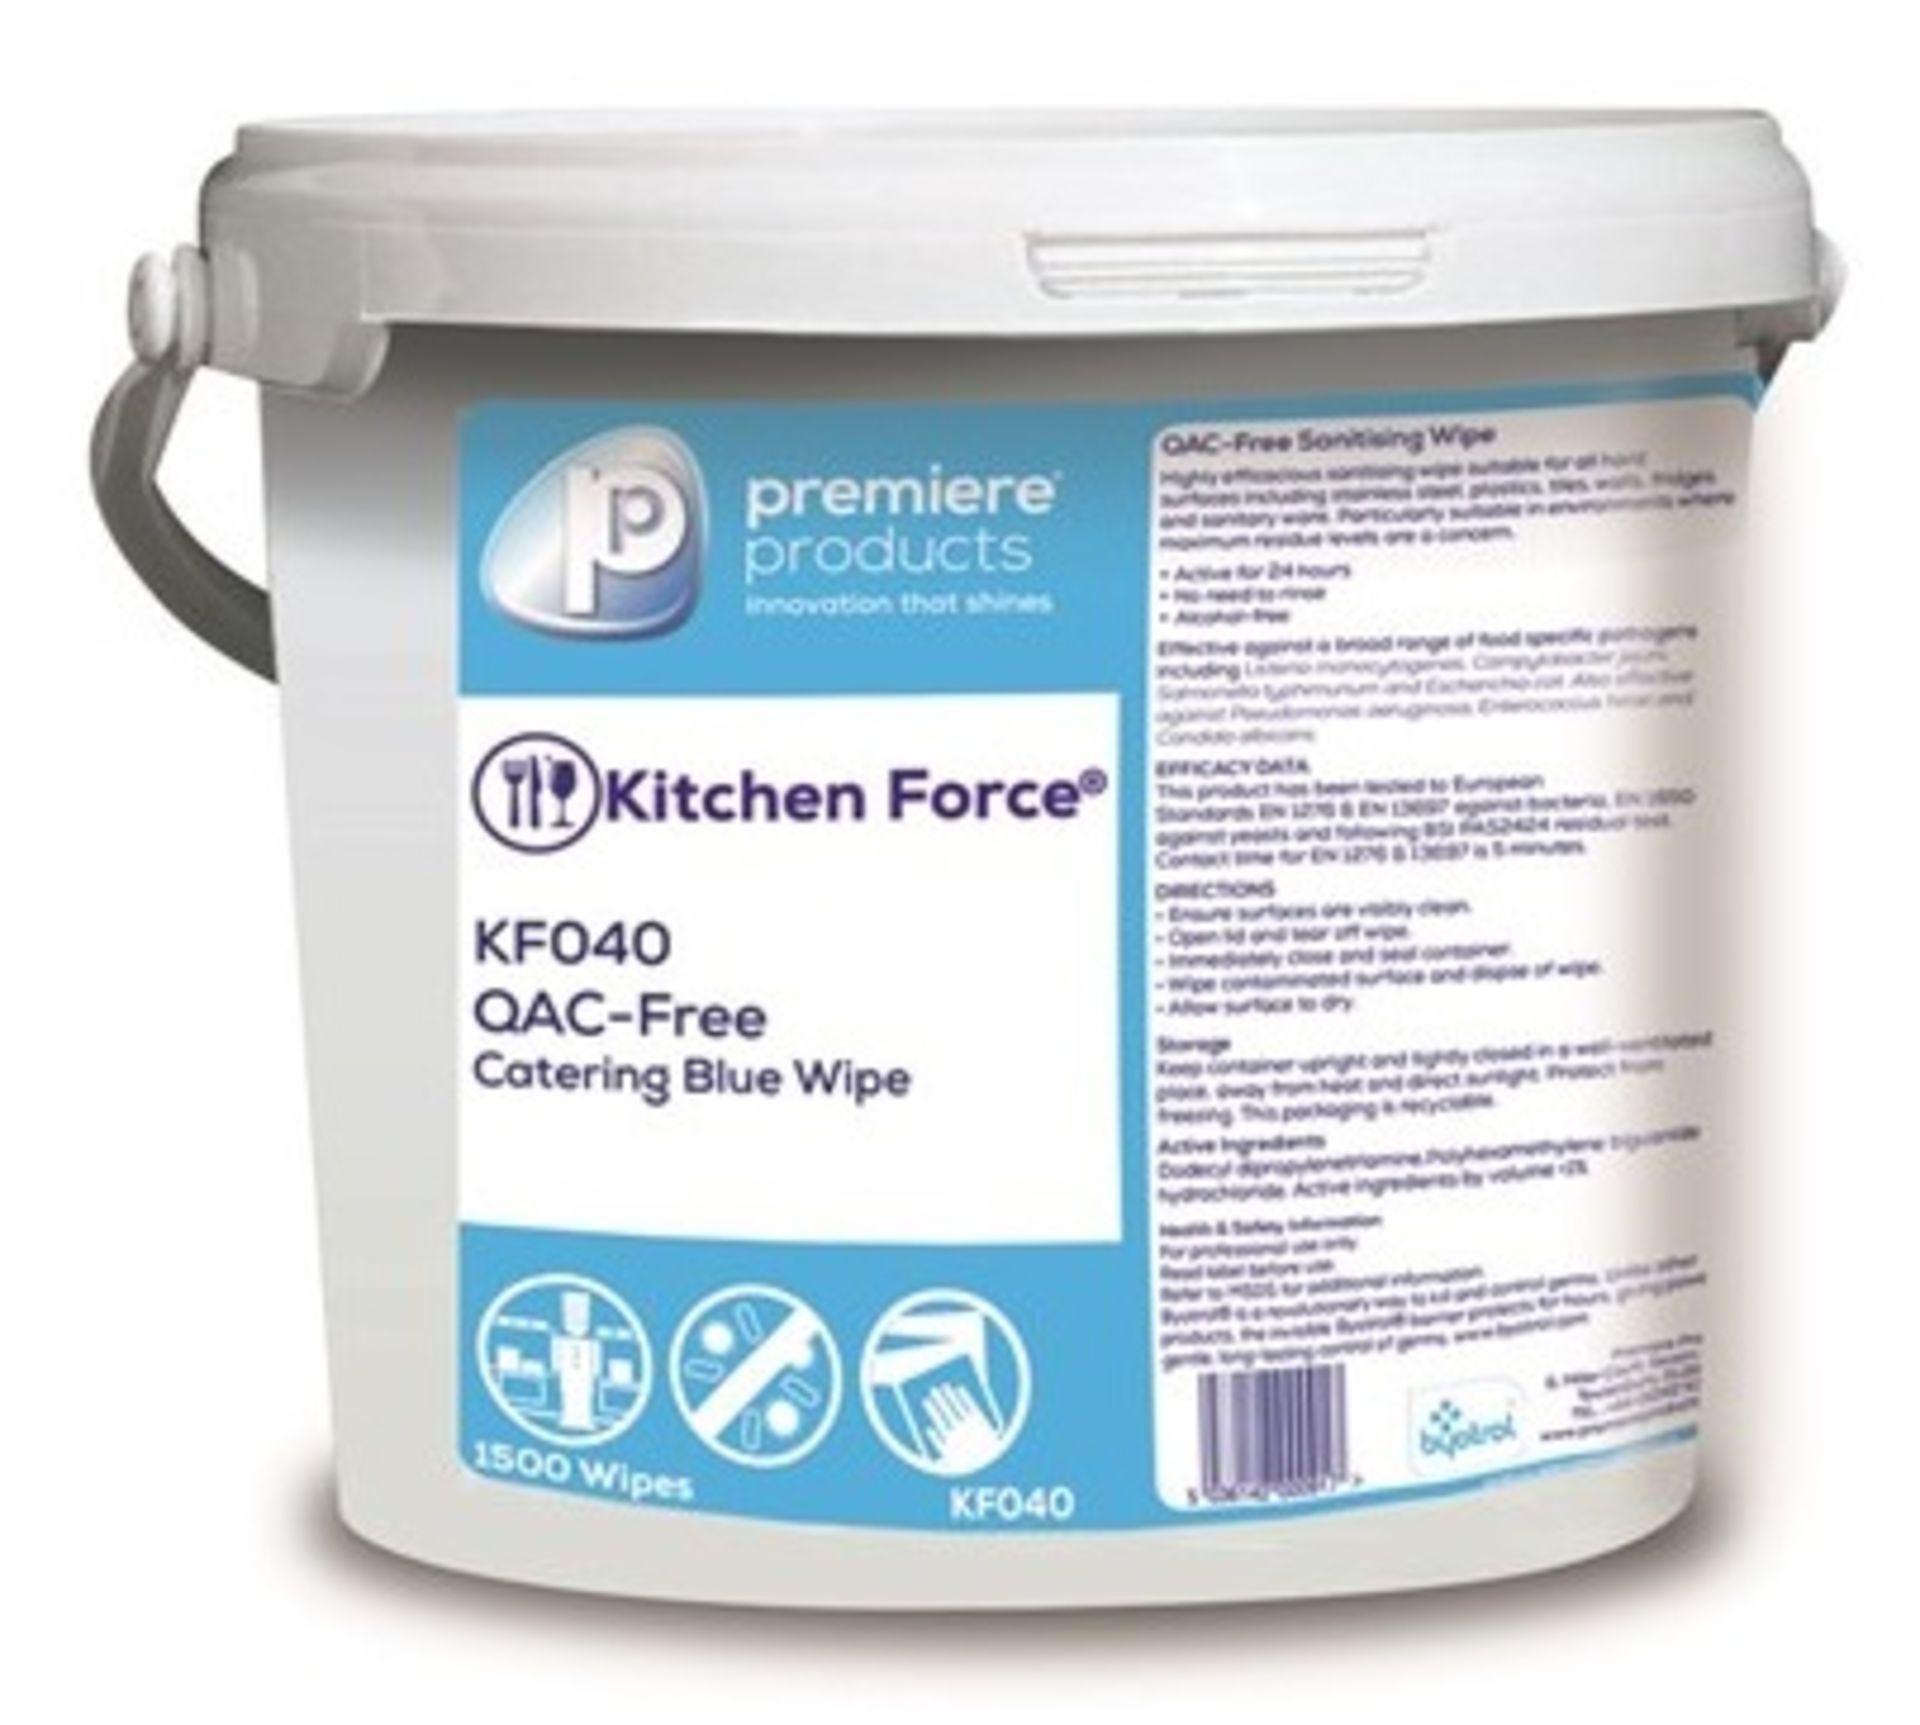 6 x Kitchen Force Blue Catering 1,500 Wipe Packs - Premiere Products - Byotrol Technology - QAC Free